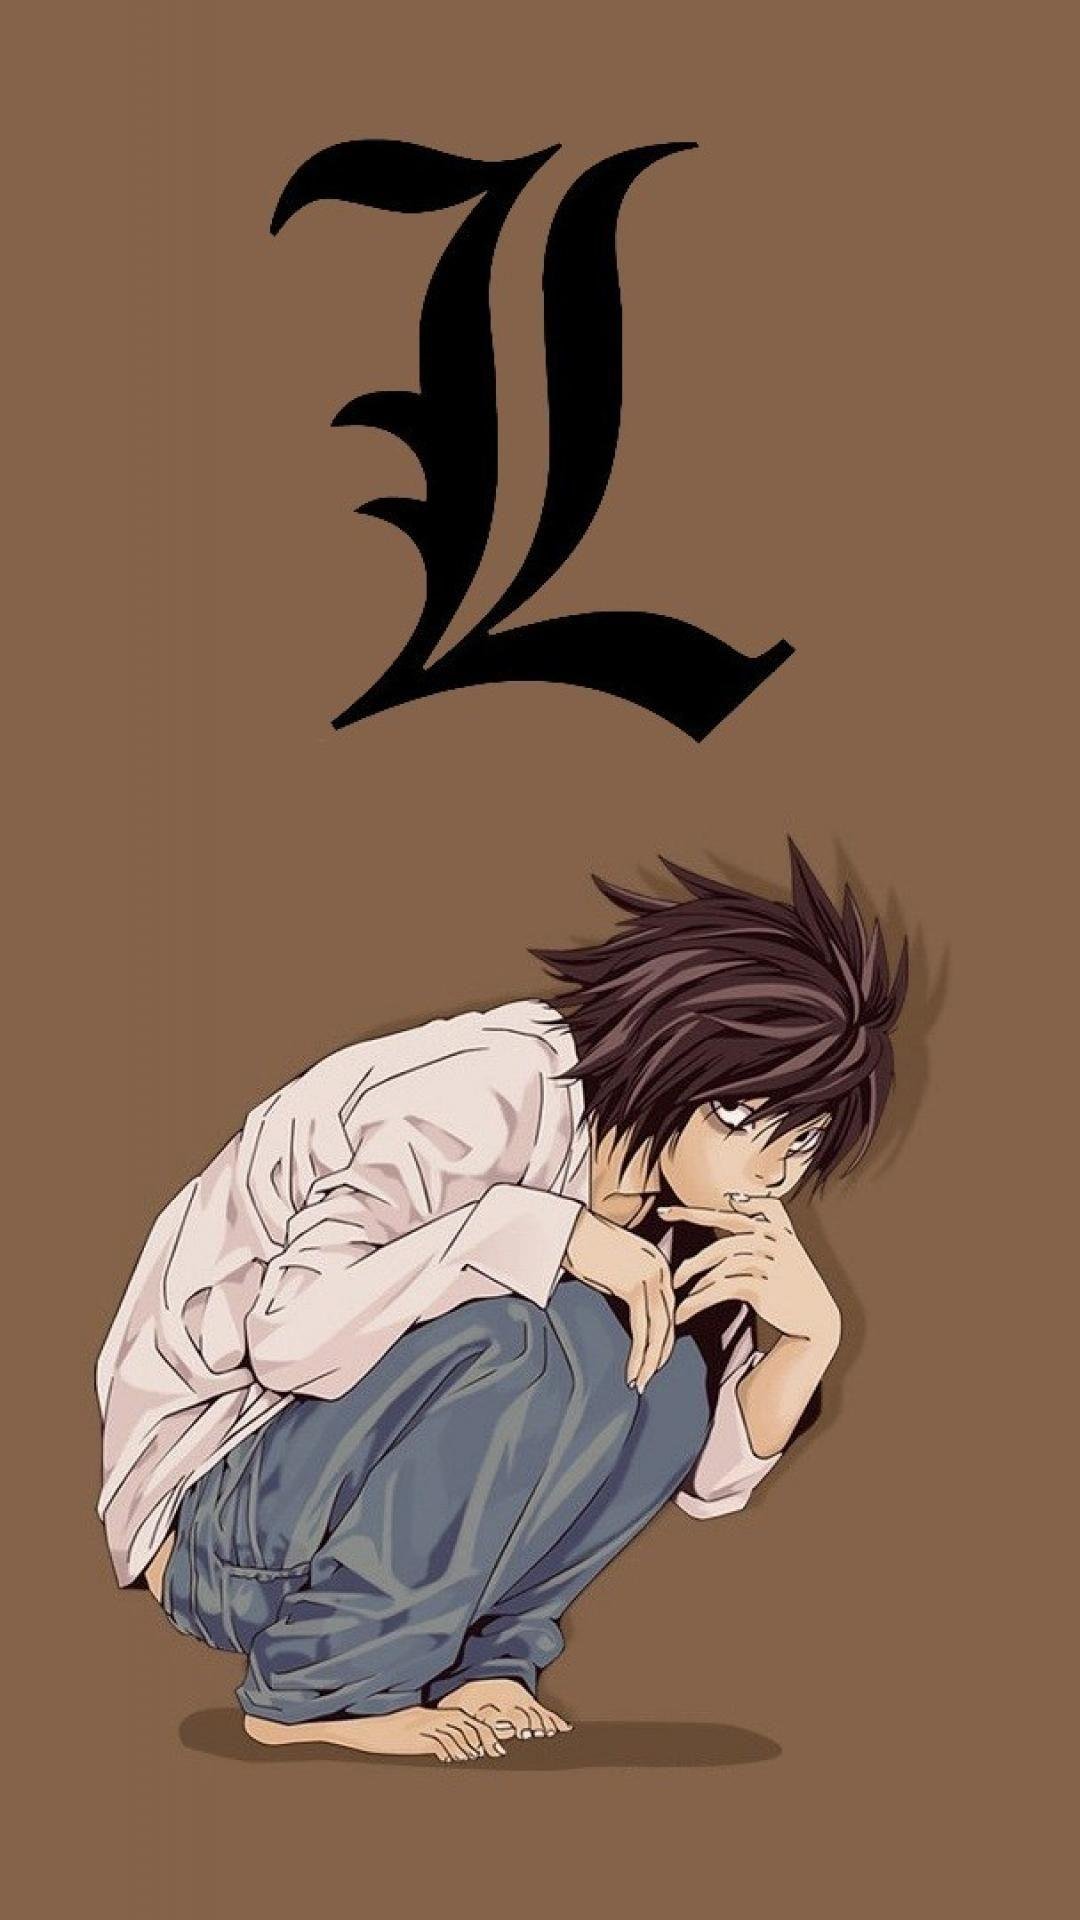 Death Note L Black Wallpapers  Death Note L Wallpaper for iPhone